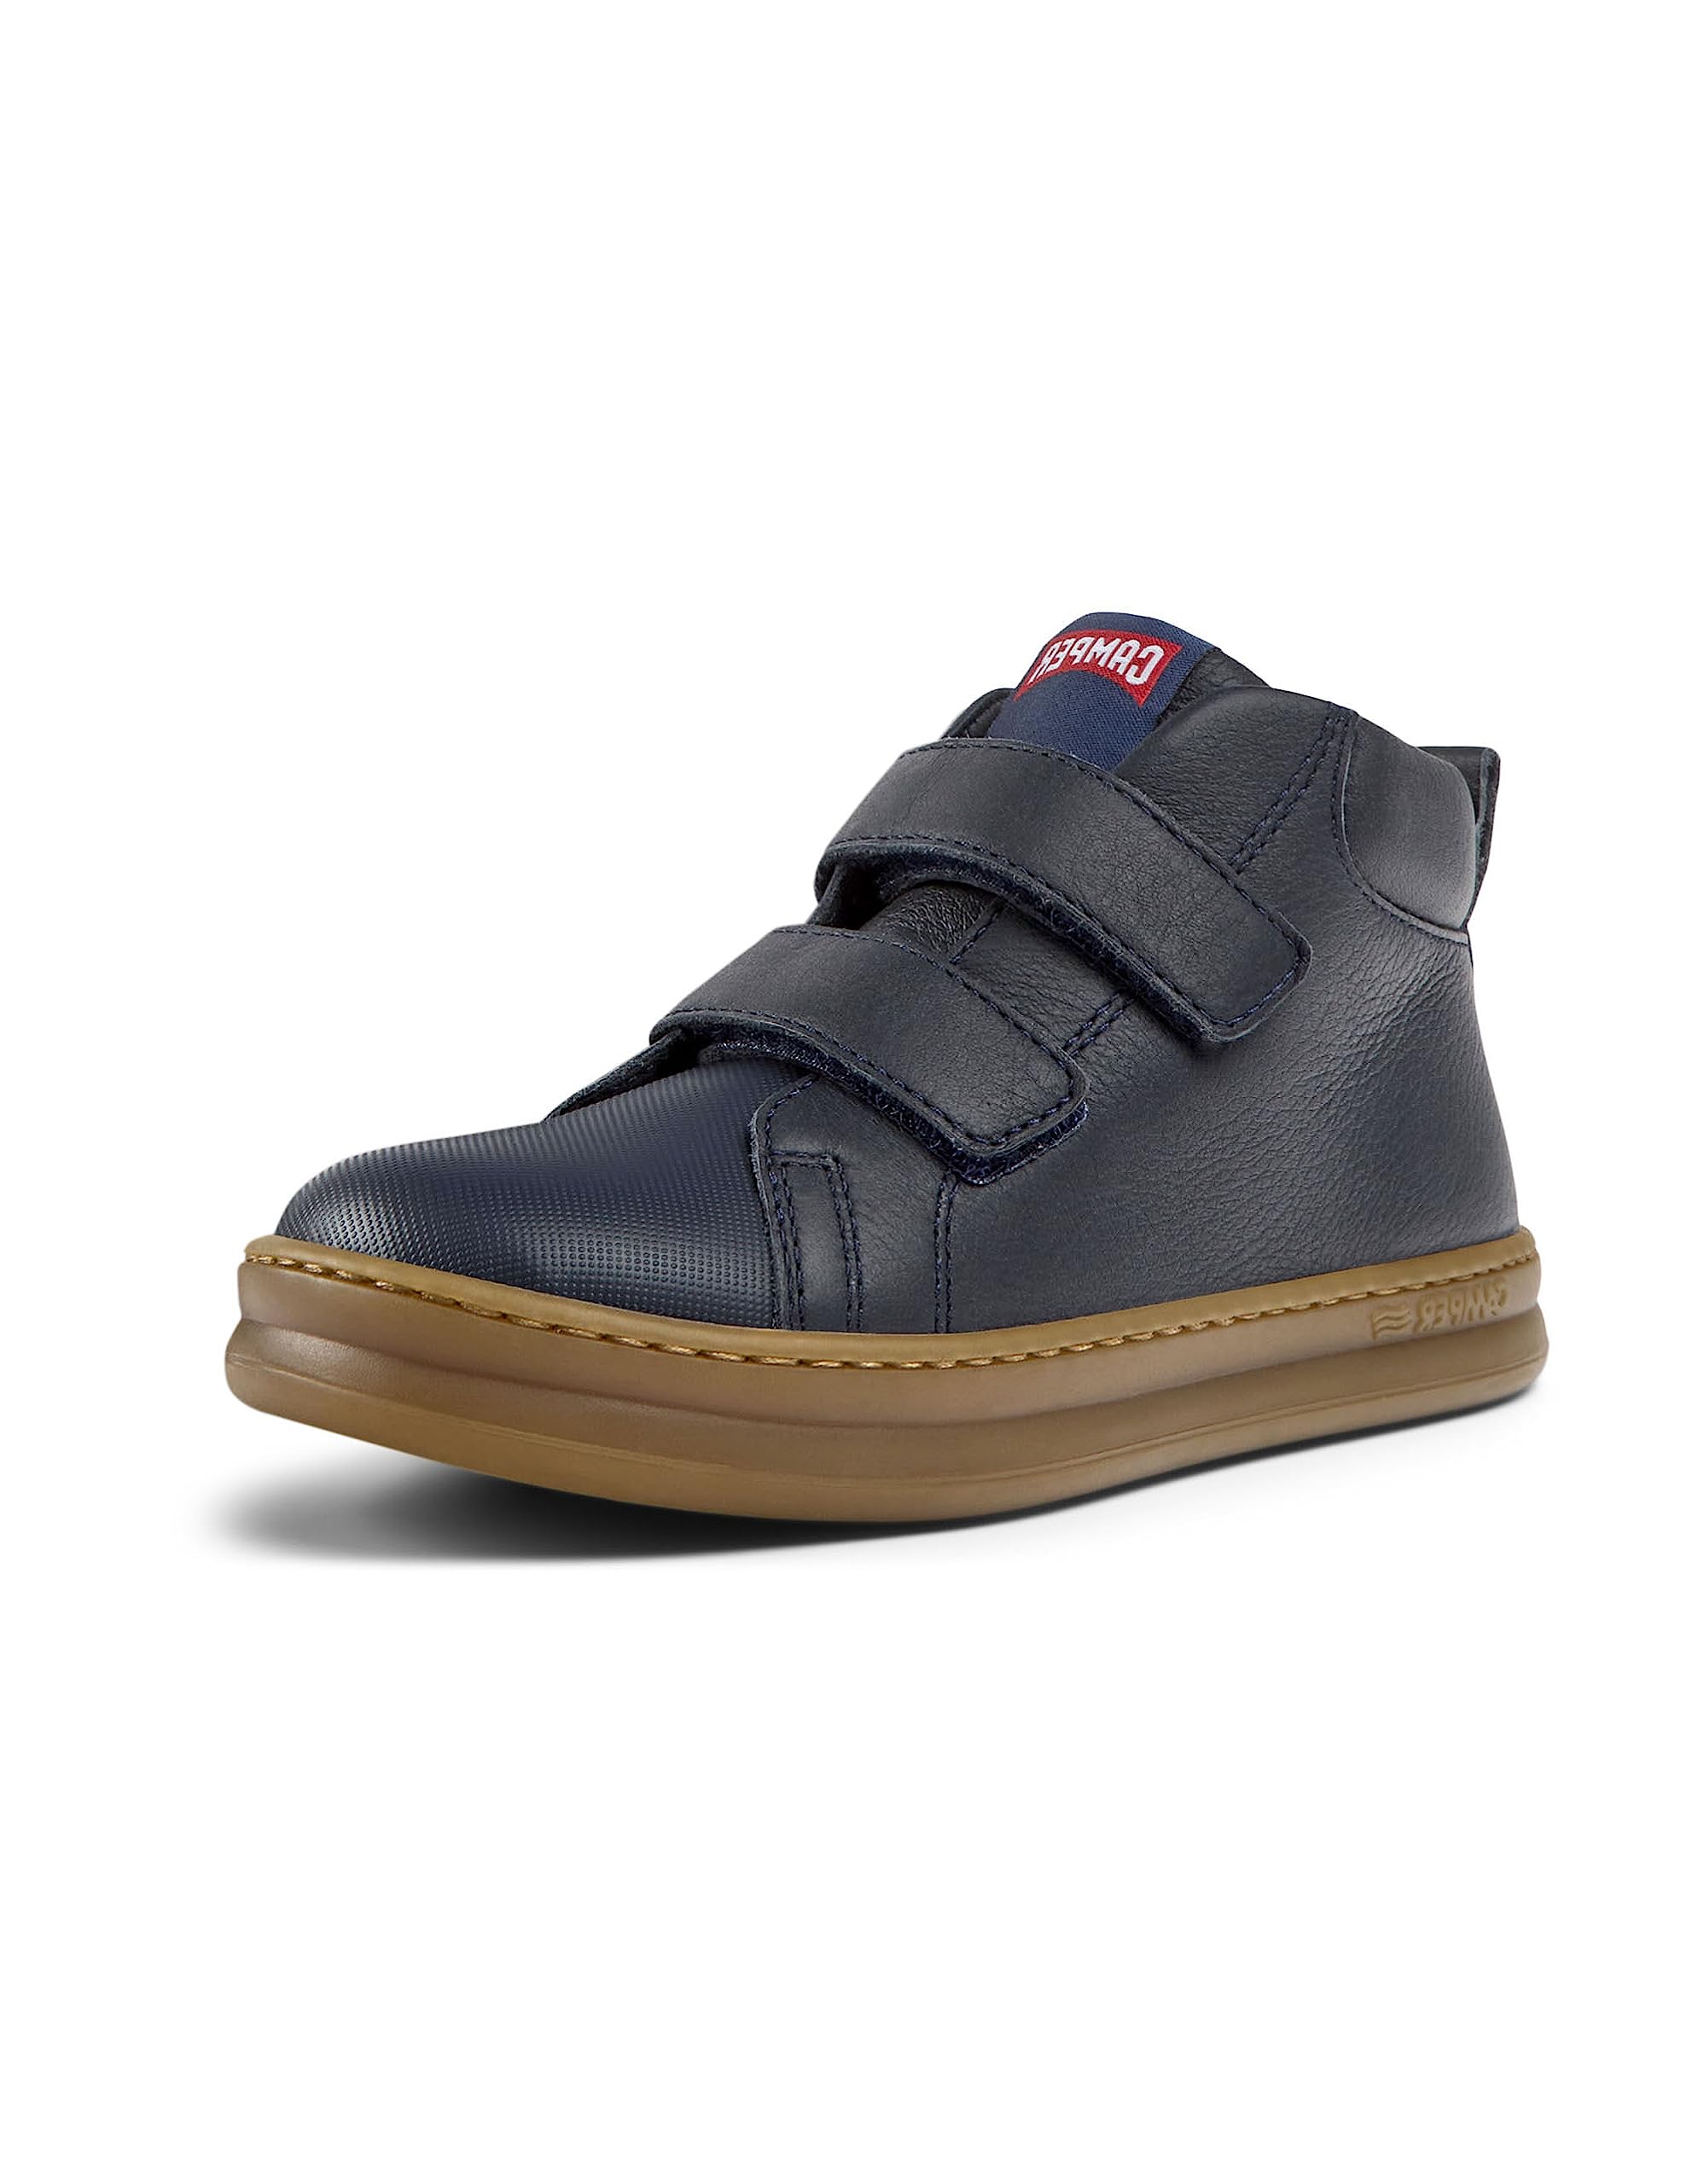 Camper Unisex-Child Sneaker Ankle Boot